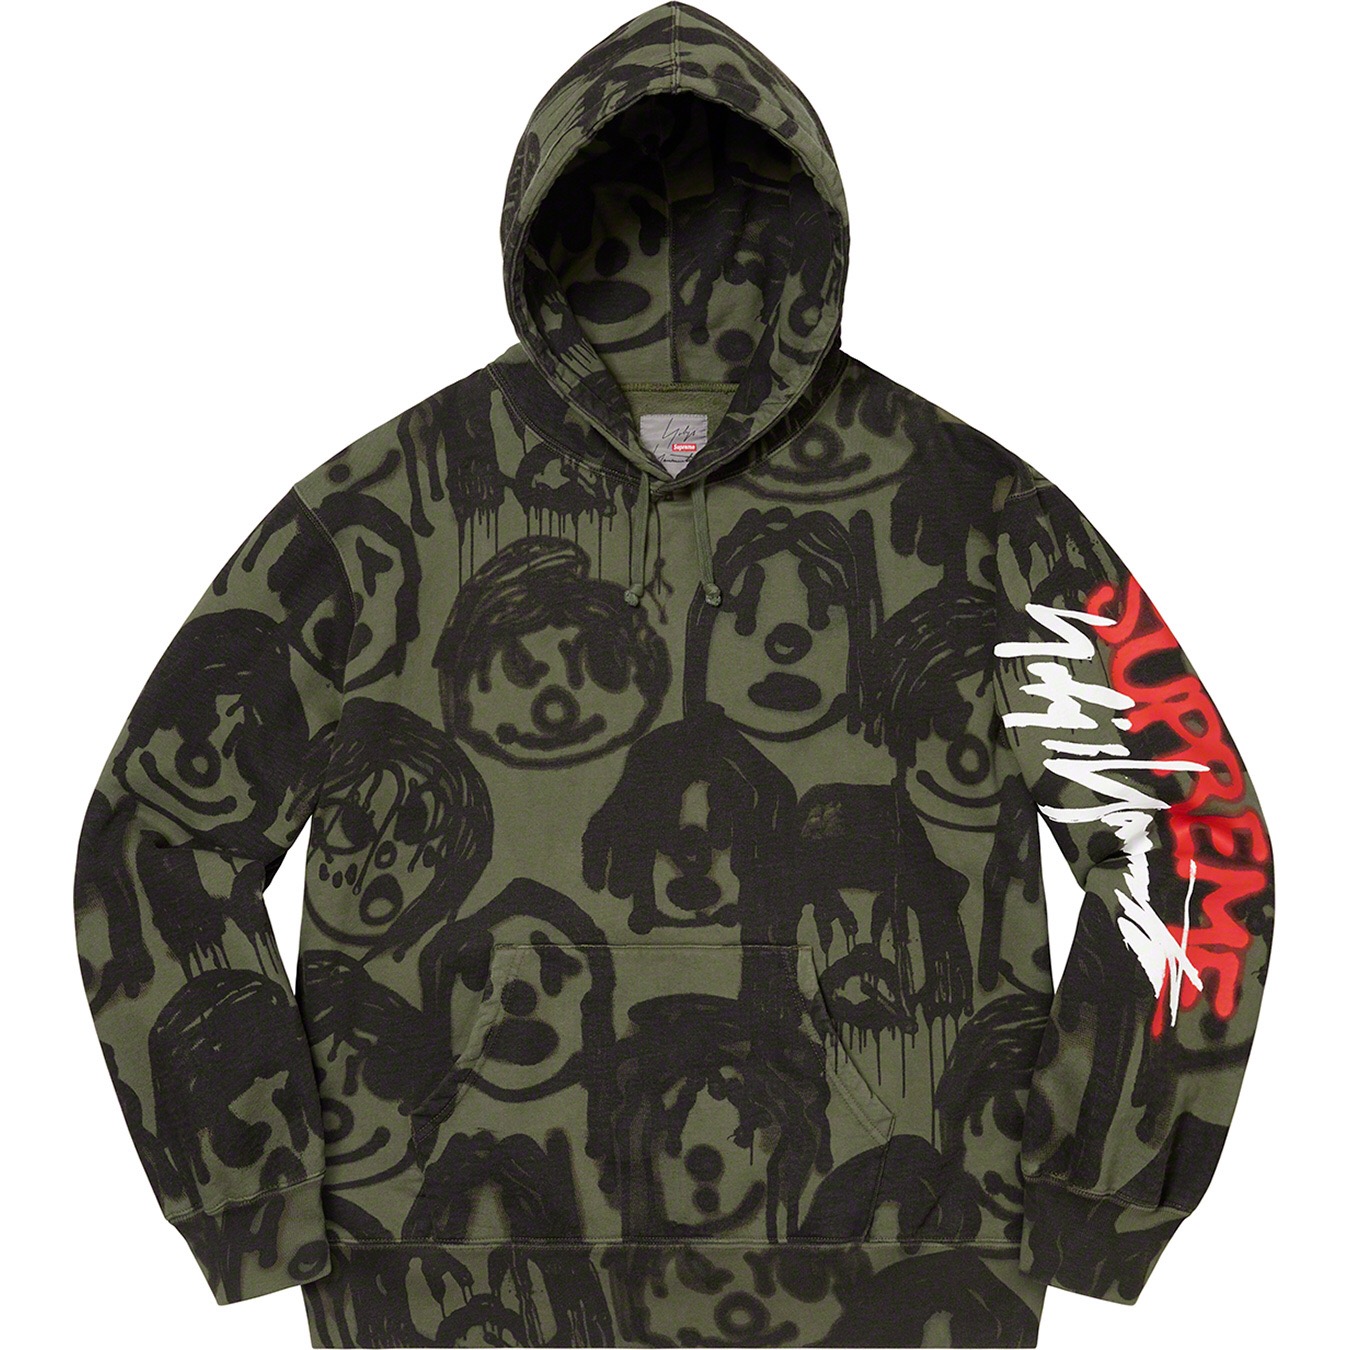 Supreme hoodie 12 (leave a note about the colorway)